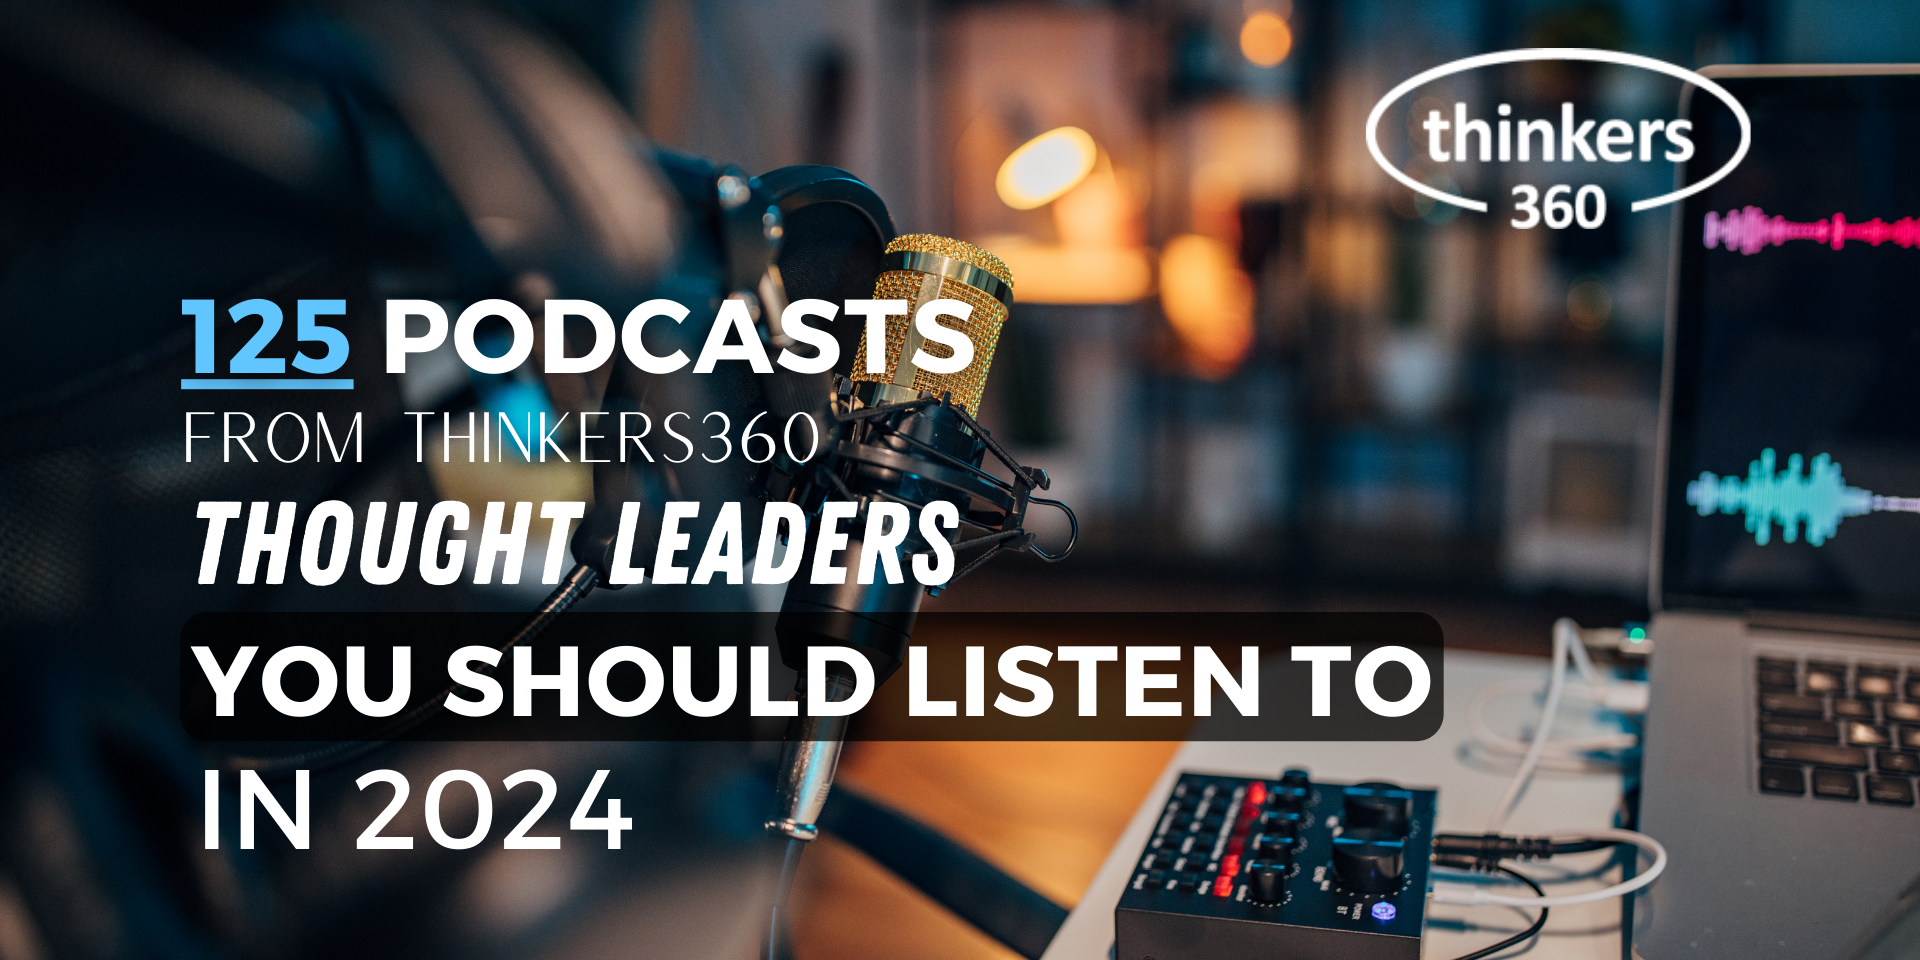 125 Podcasts from Thinkers360 Thought Leaders You Should Listen To in 2024